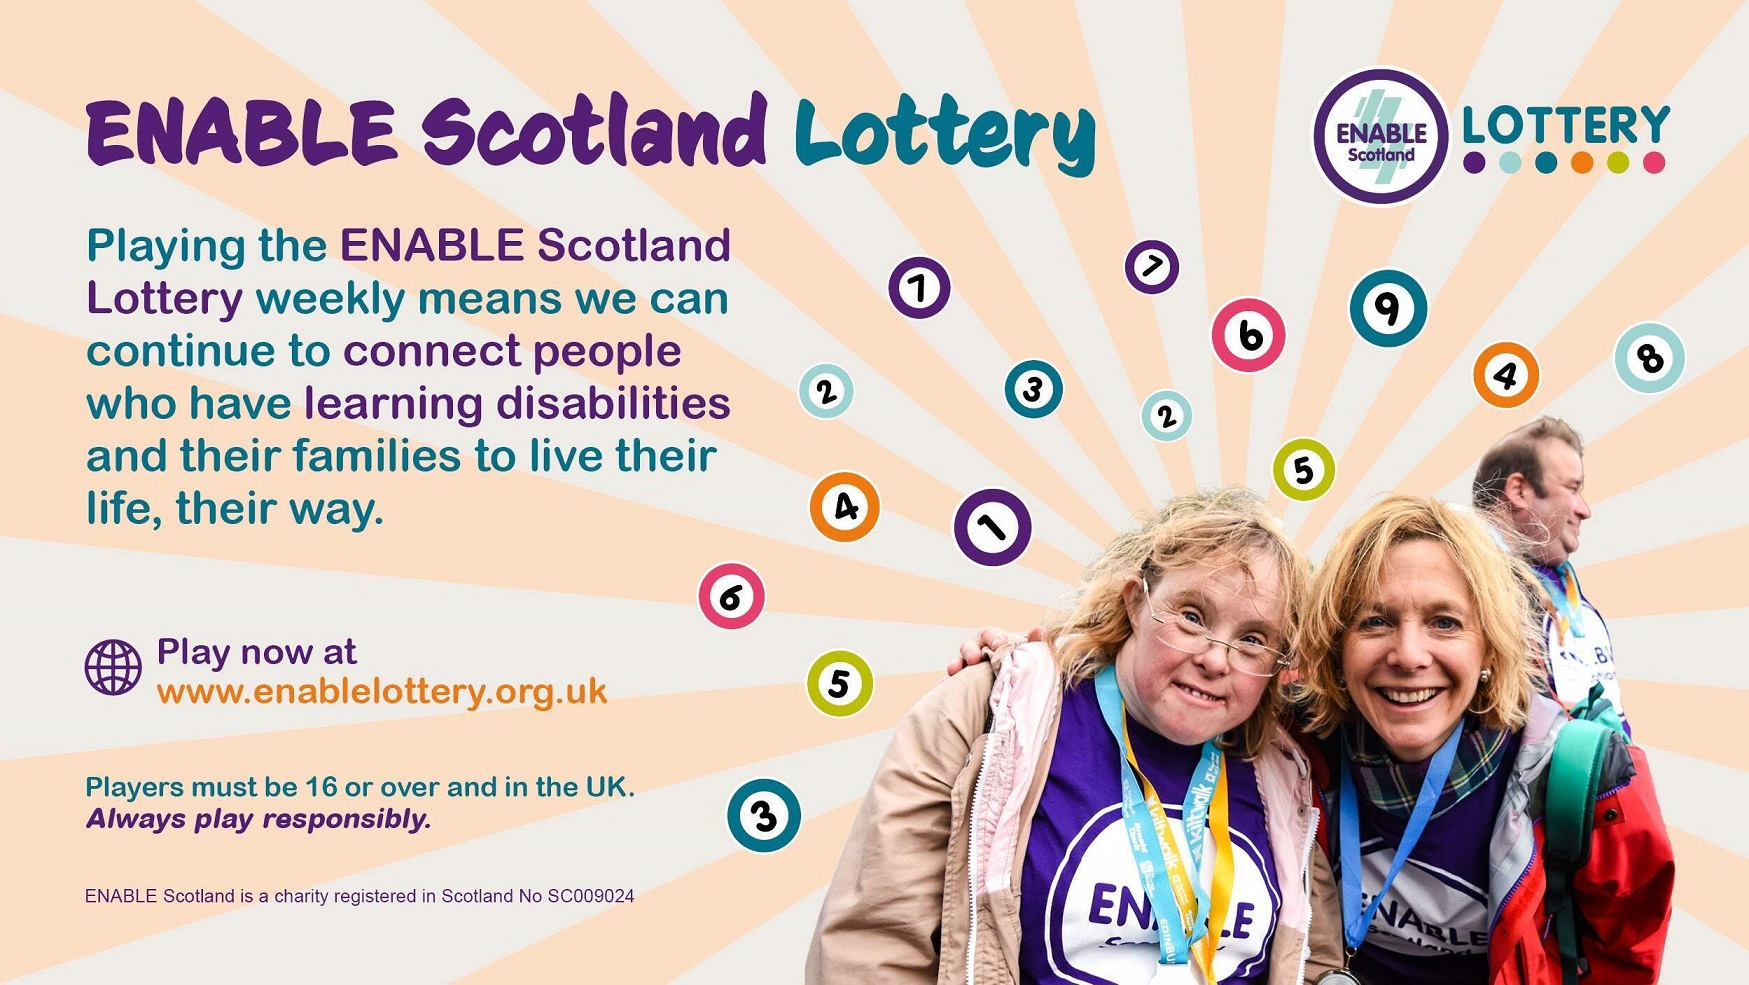 Play the ENABLE Scotland lottery